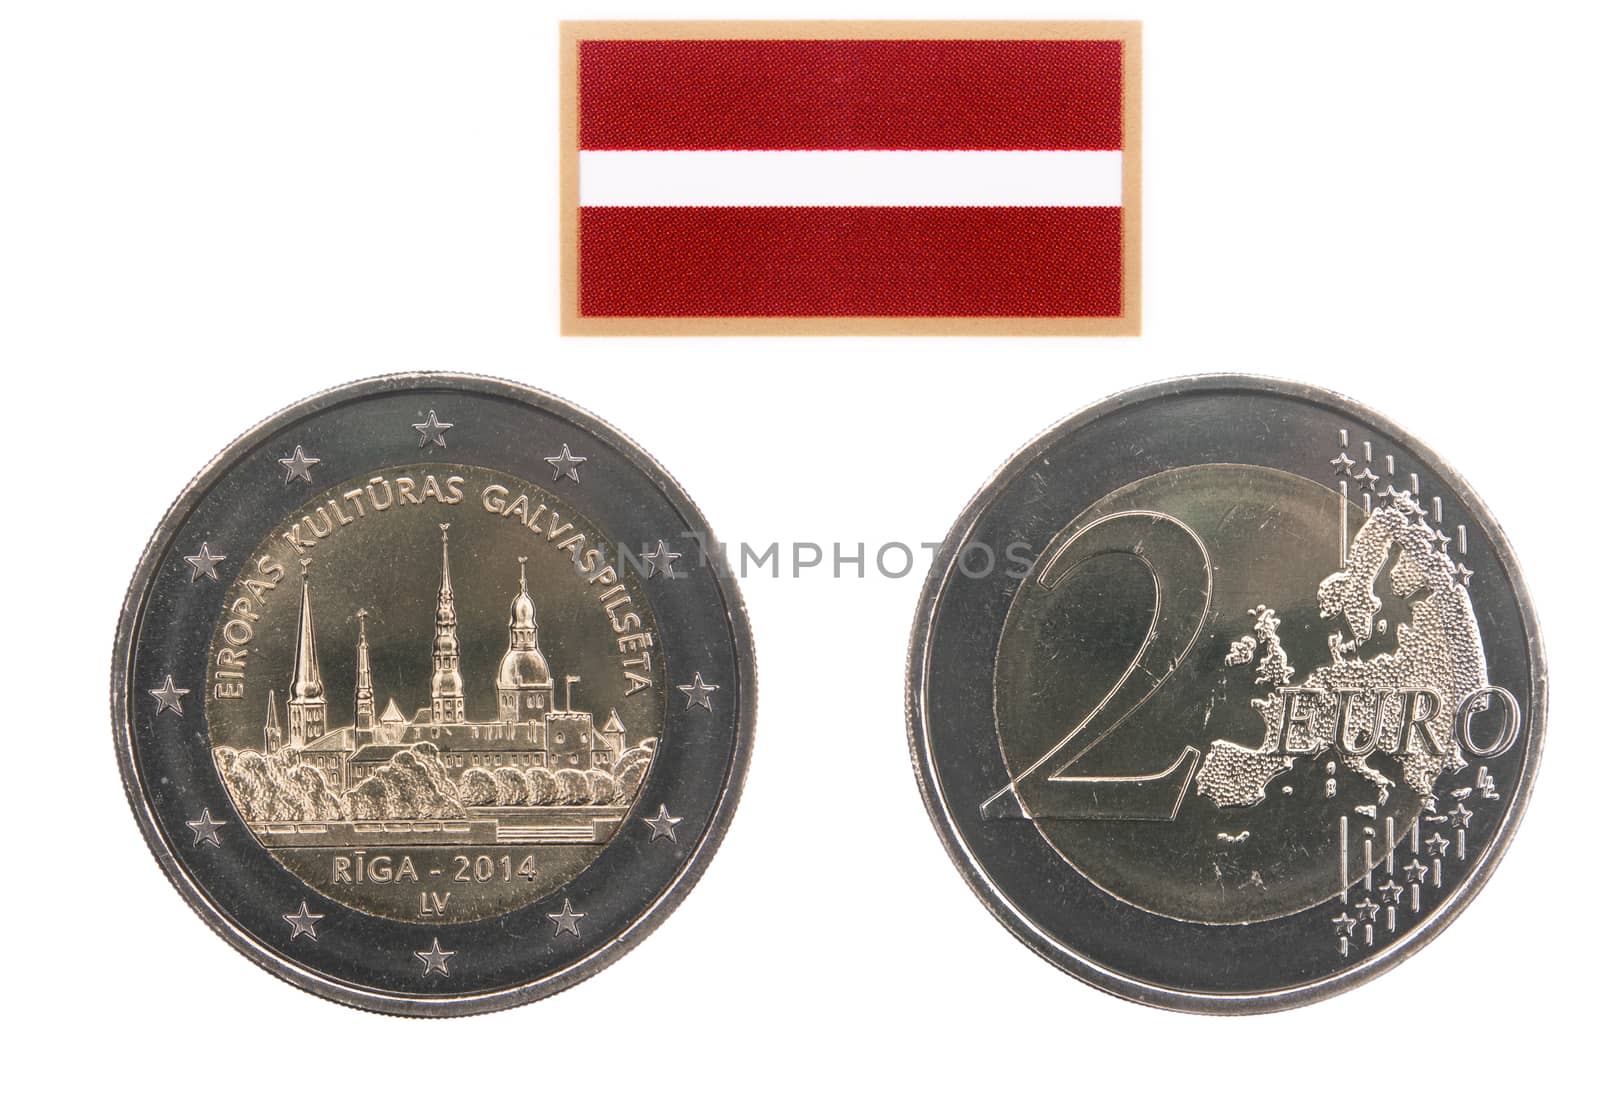 Two sides of commemorative coin of Latvia isolated on white